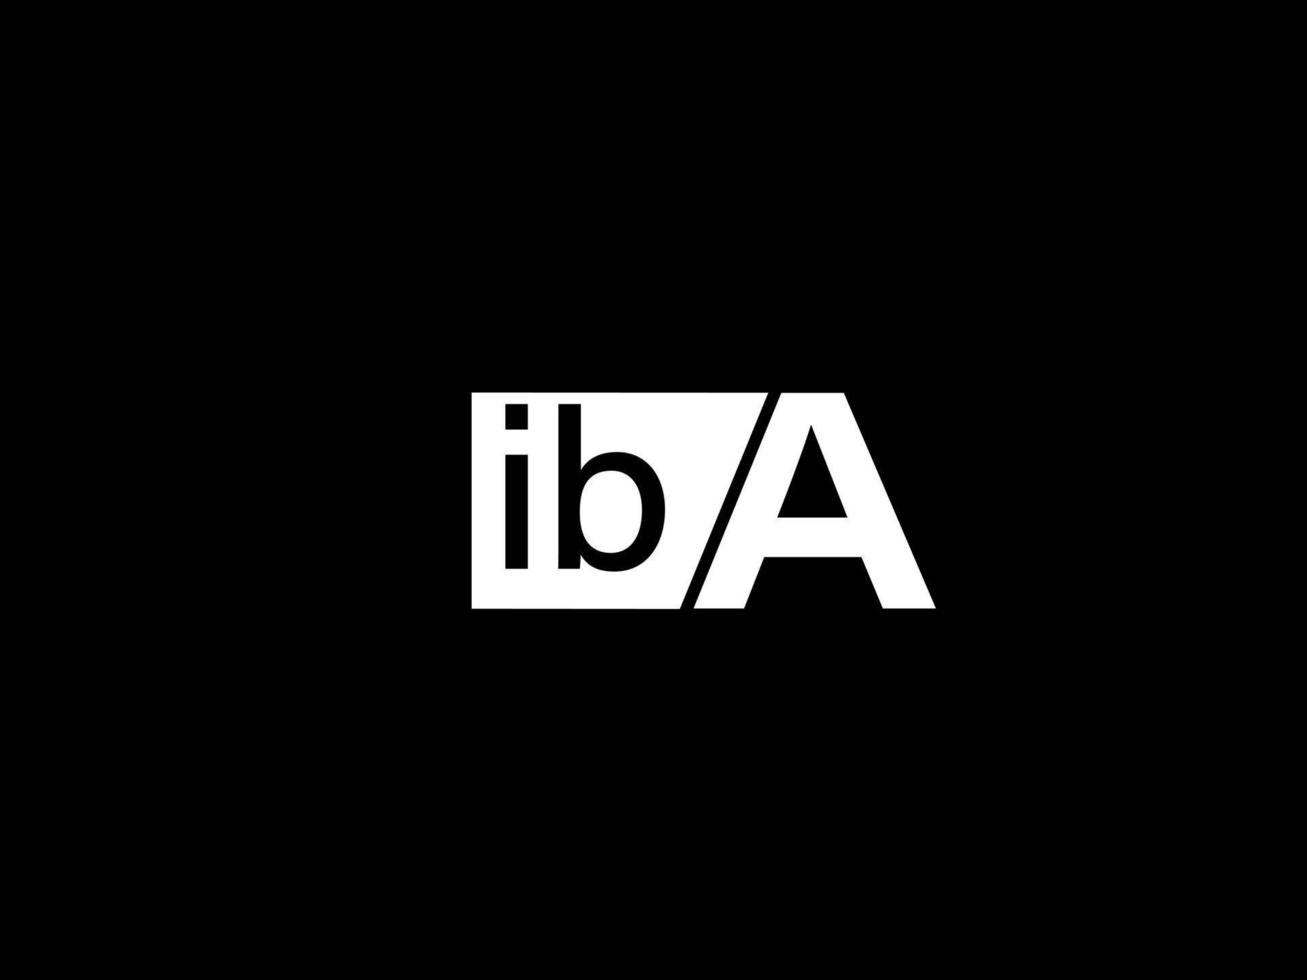 IBA Logo and Graphics design vector art, Icons isolated on black background